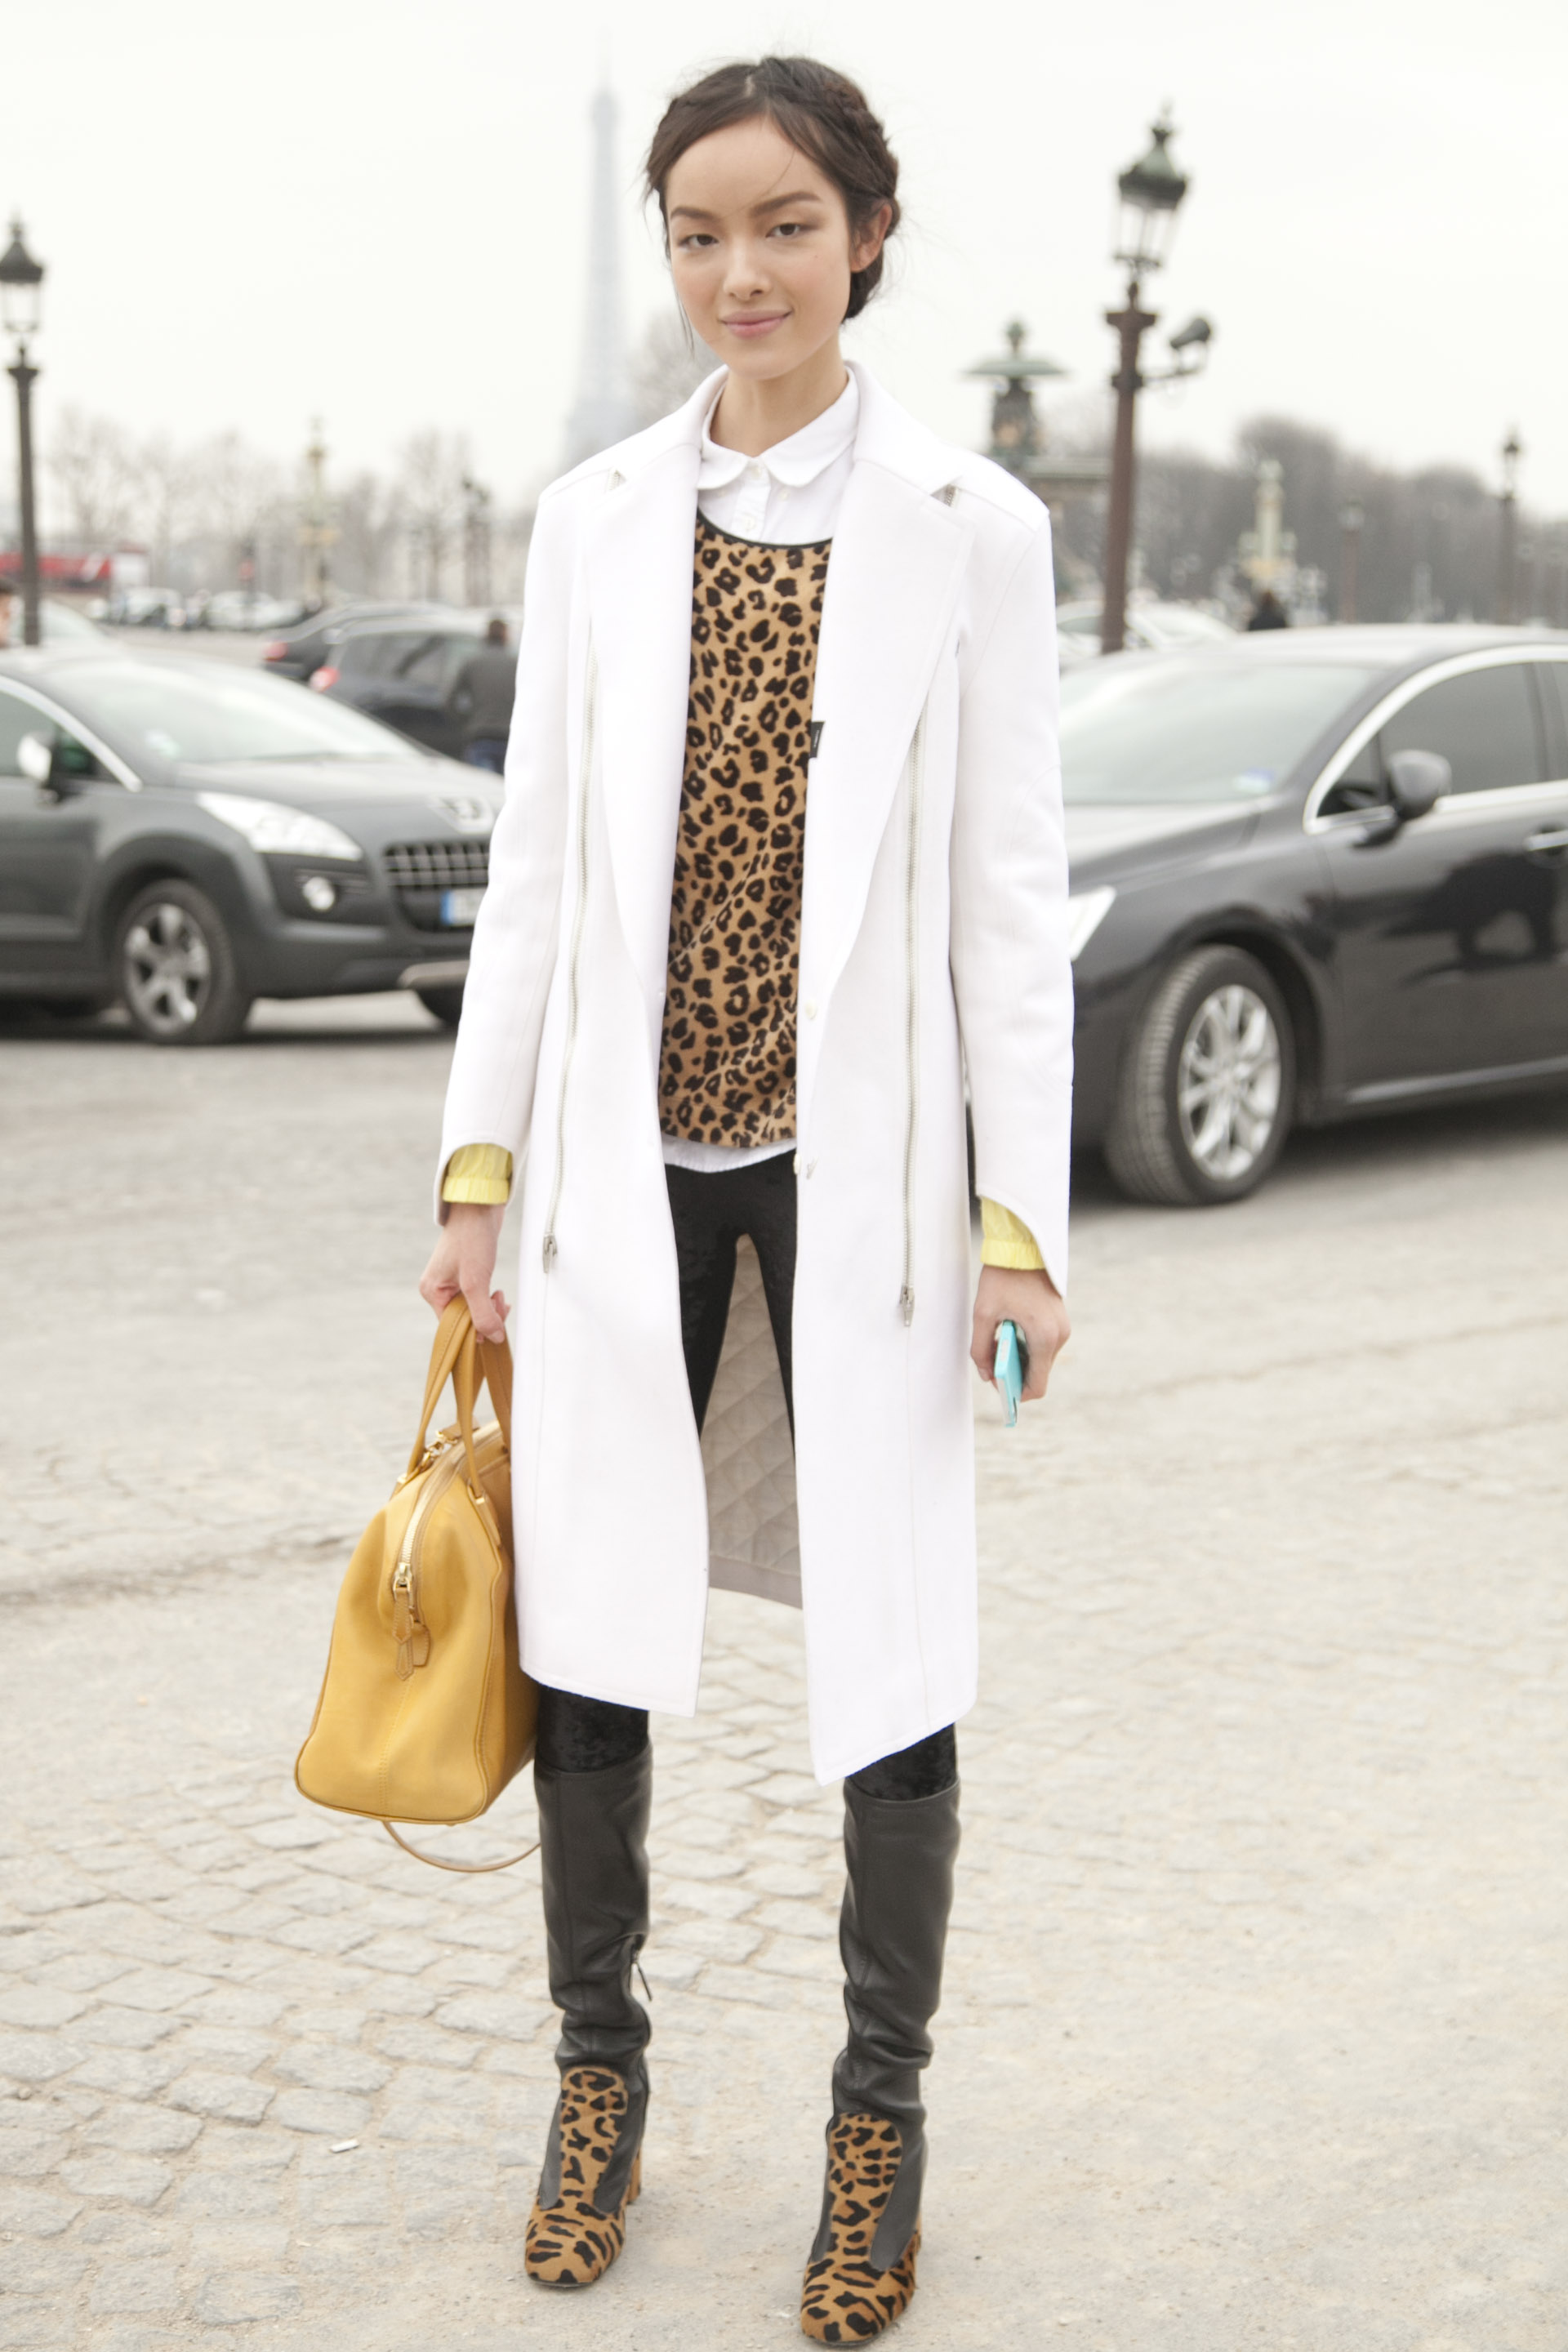 We love the high-impact contrast of leopard-print and crisp white ...